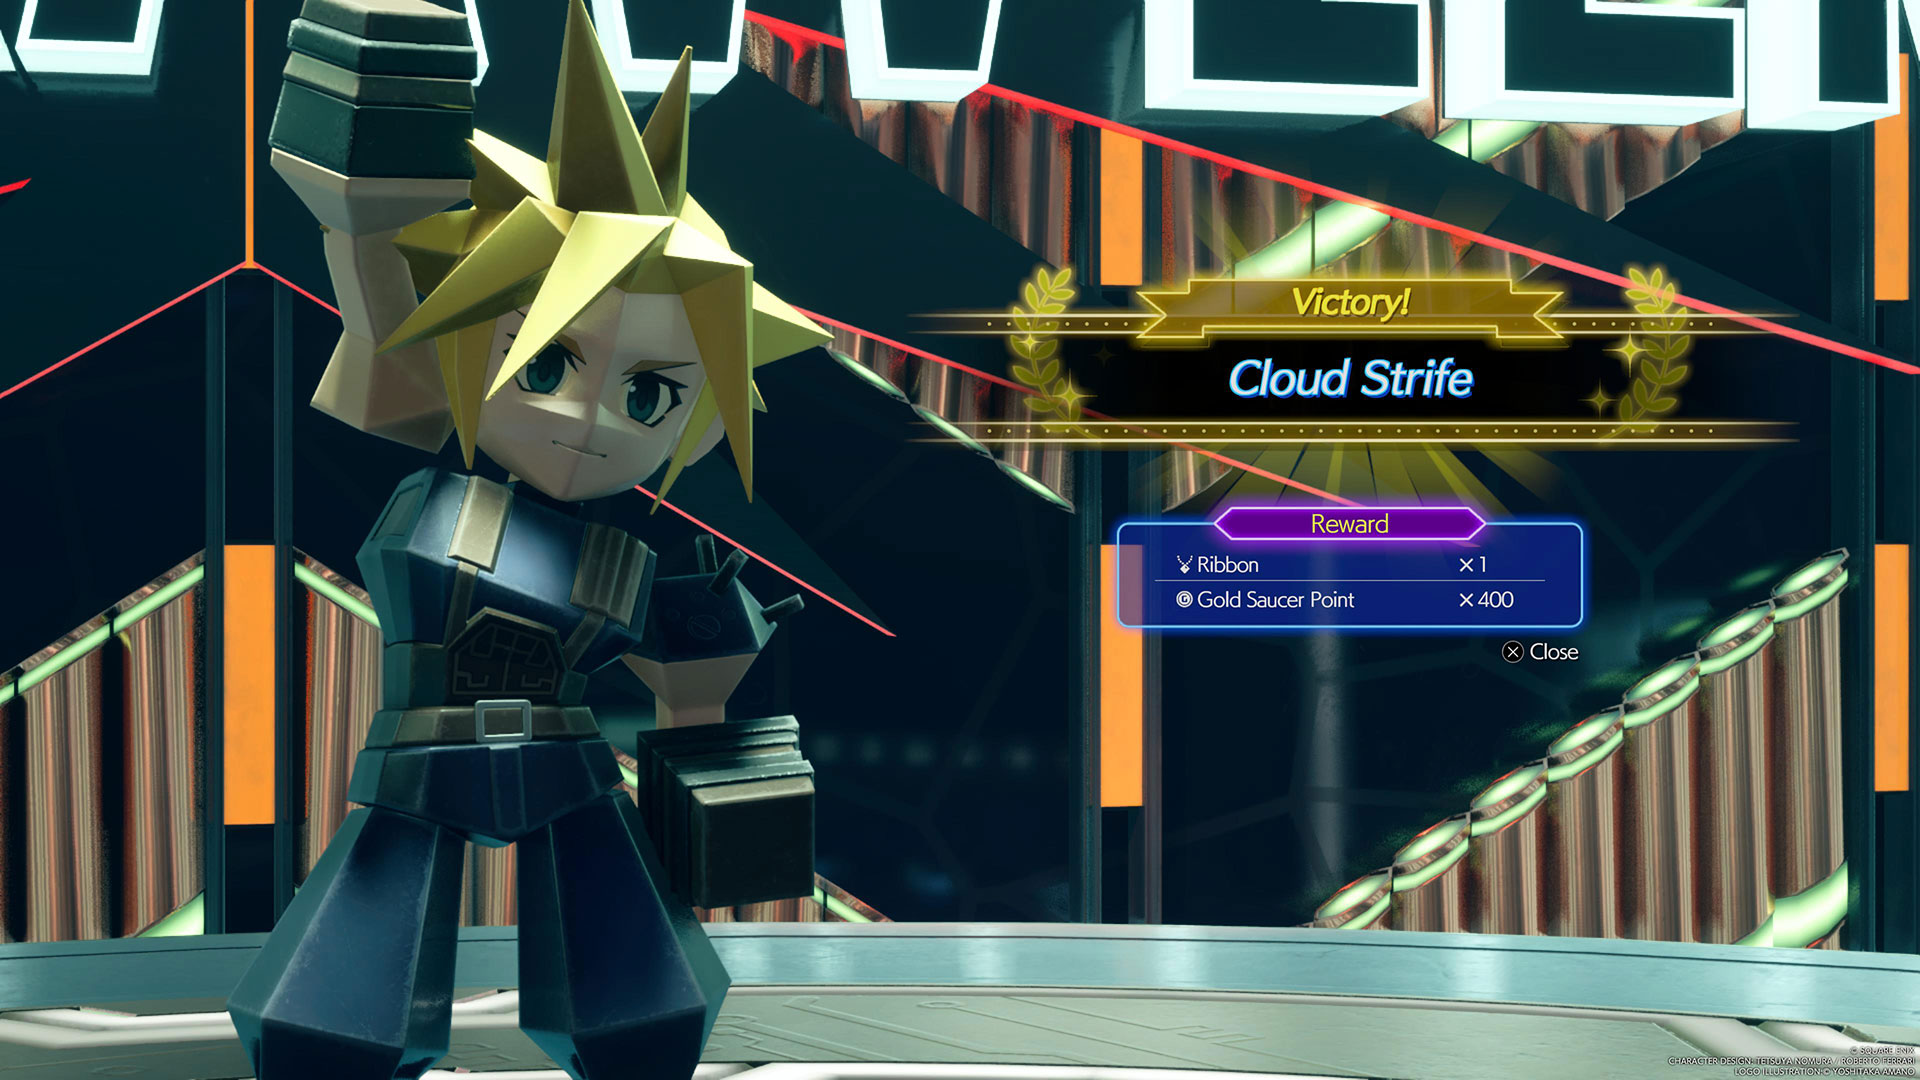 Sephiroth in the 3D Brawler isn't even the most frustrating Sephiroth in the game